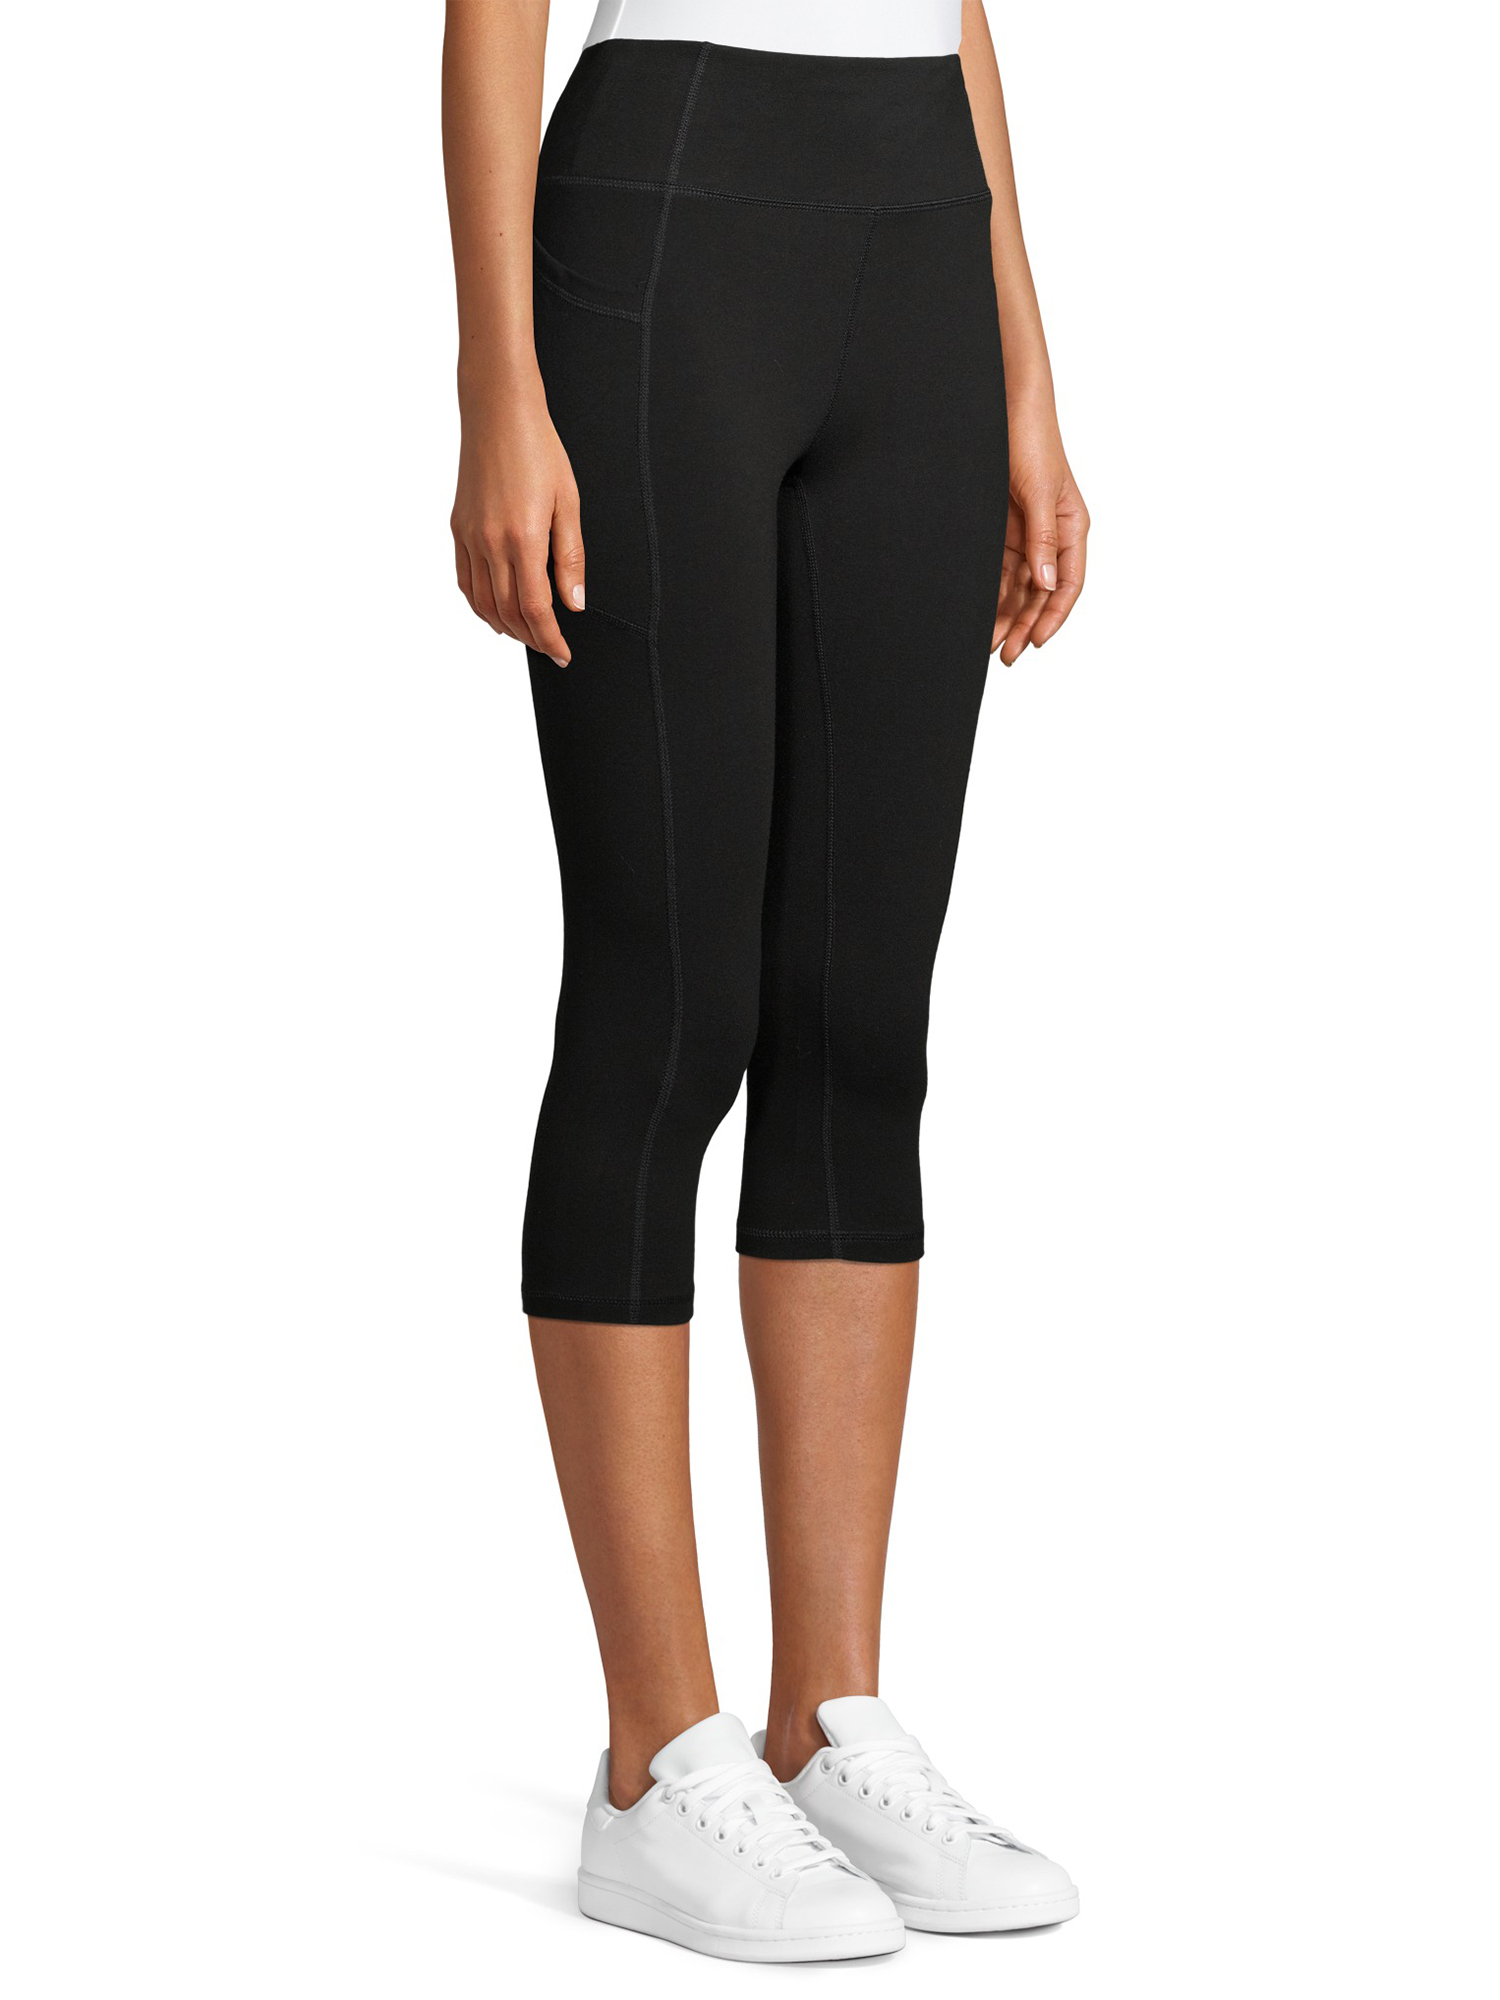 Athletic Works Women's Capris with Side Pockets - image 4 of 6